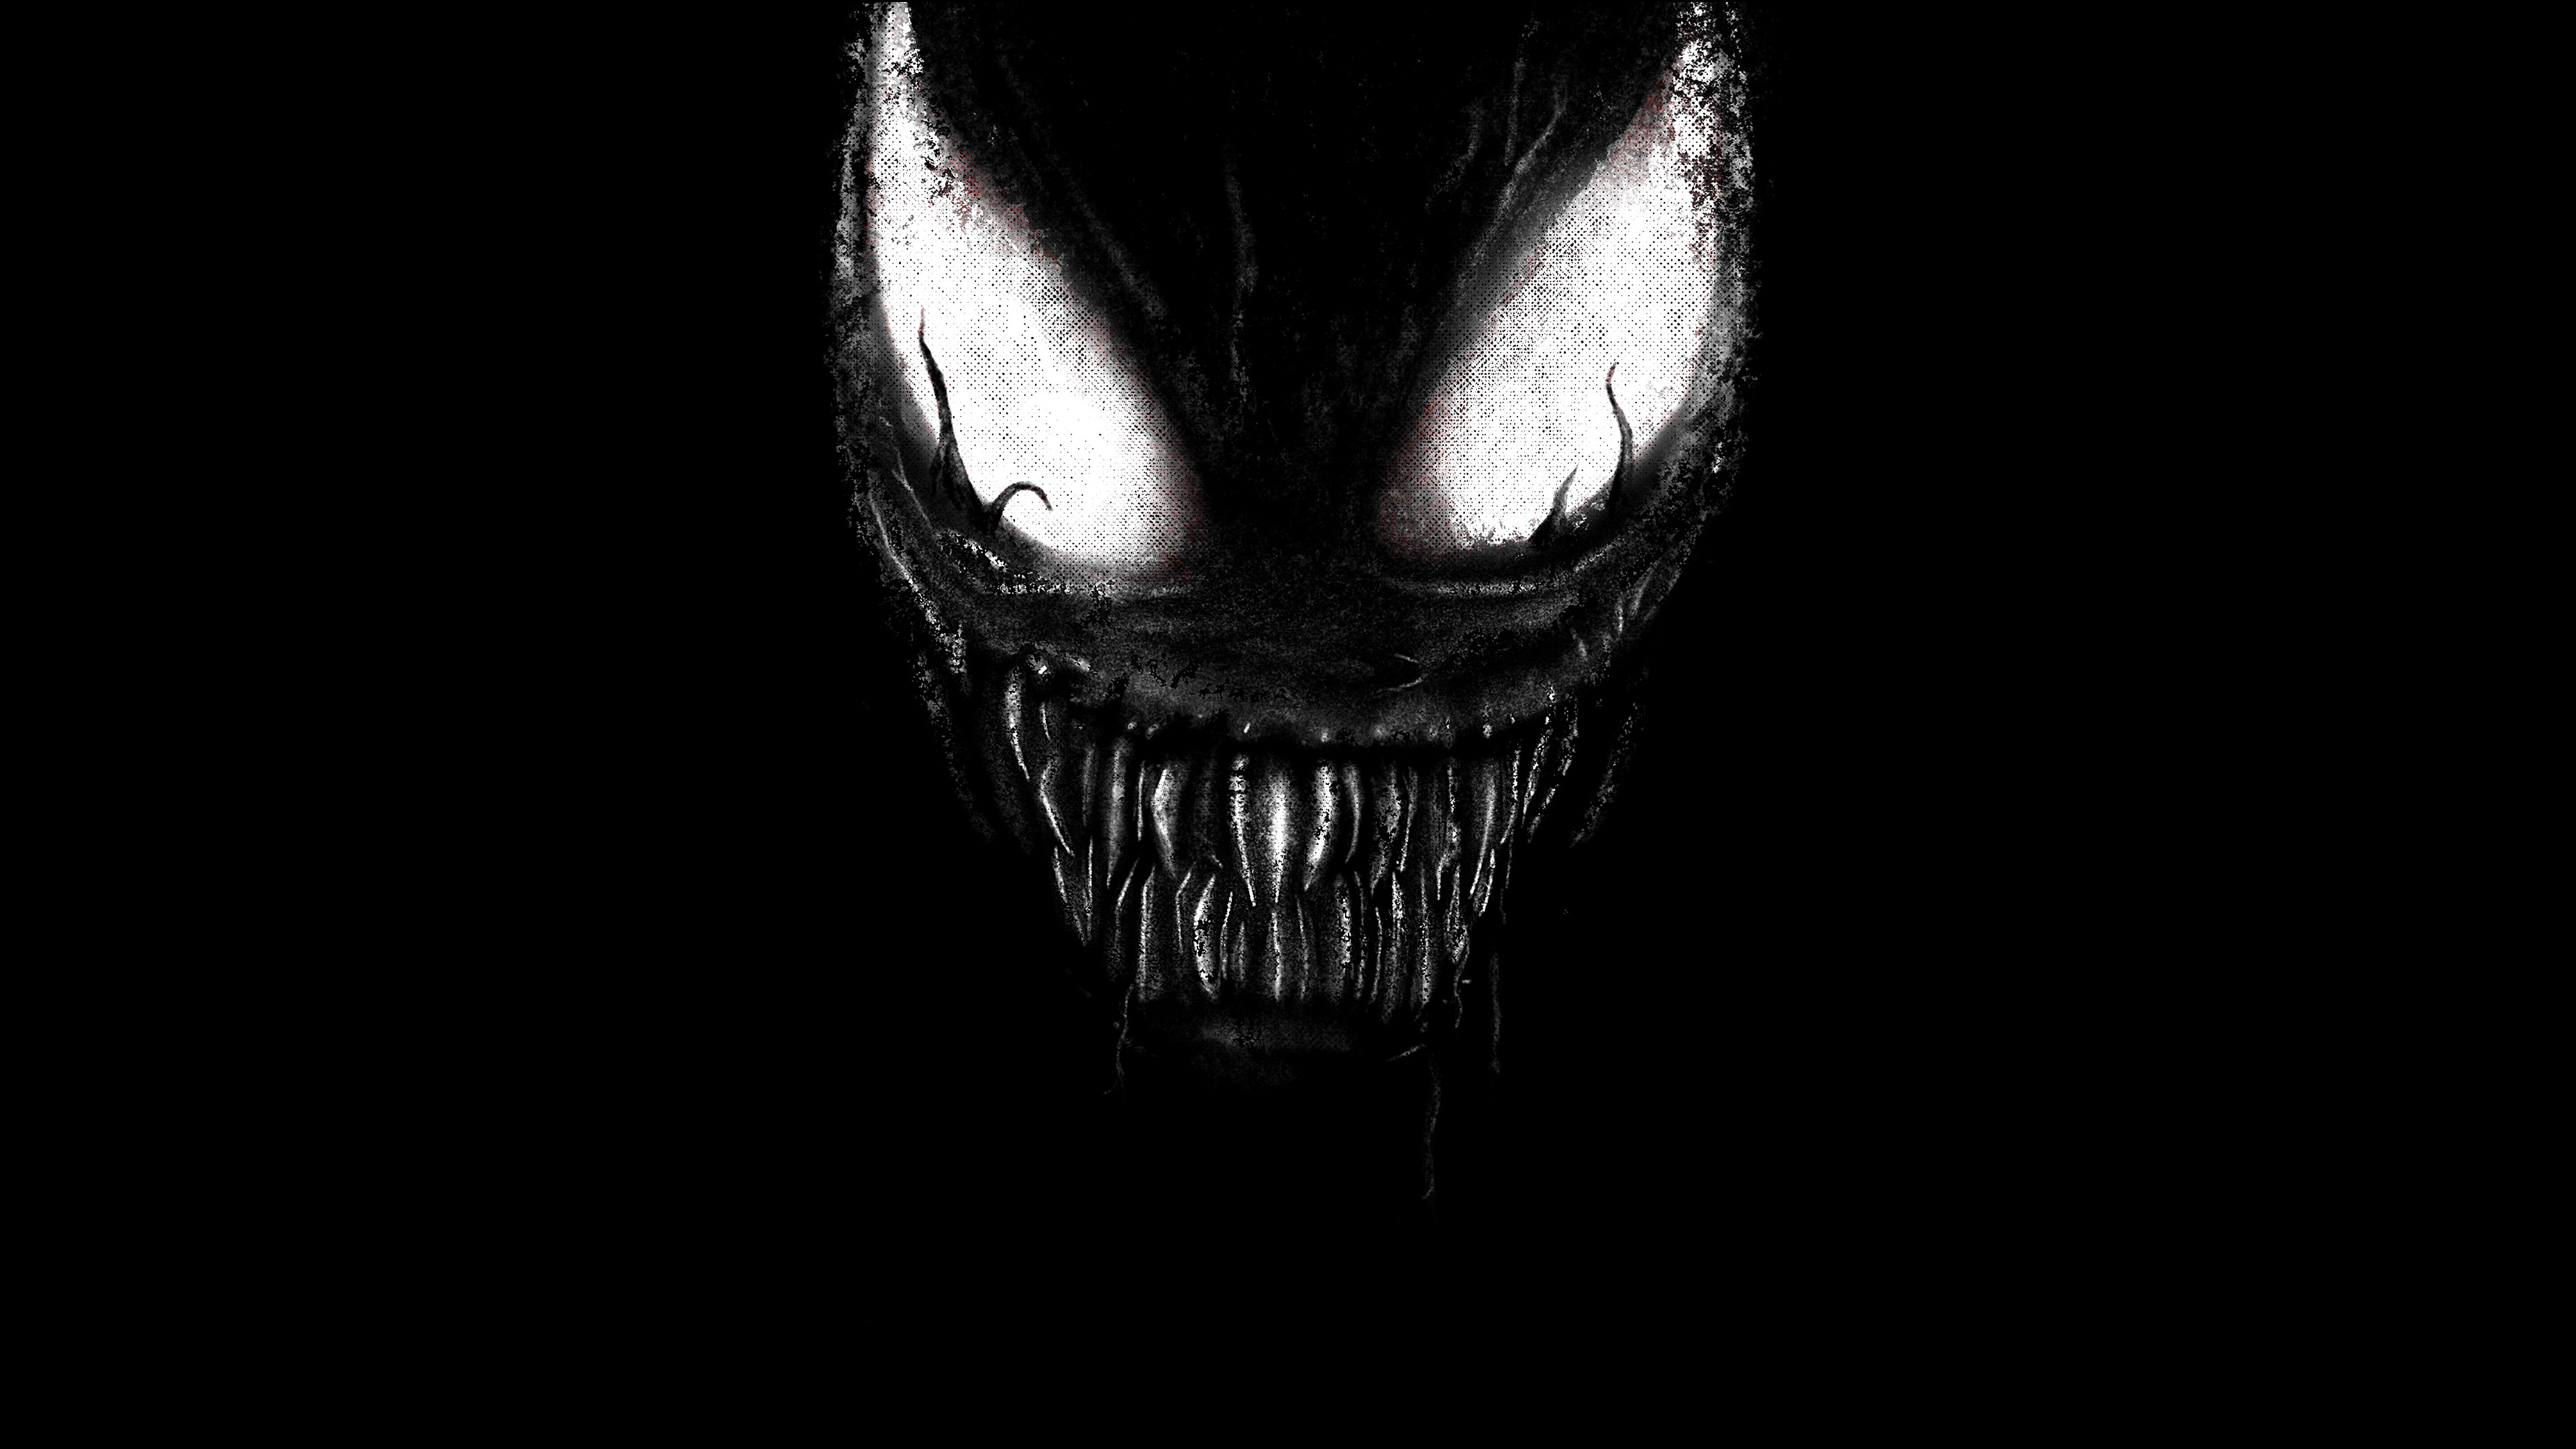 540x Venom 2 4k Art 540x Resolution Wallpaper Hd Movies 4k Wallpapers Images Photos And Background Wallpapers Den